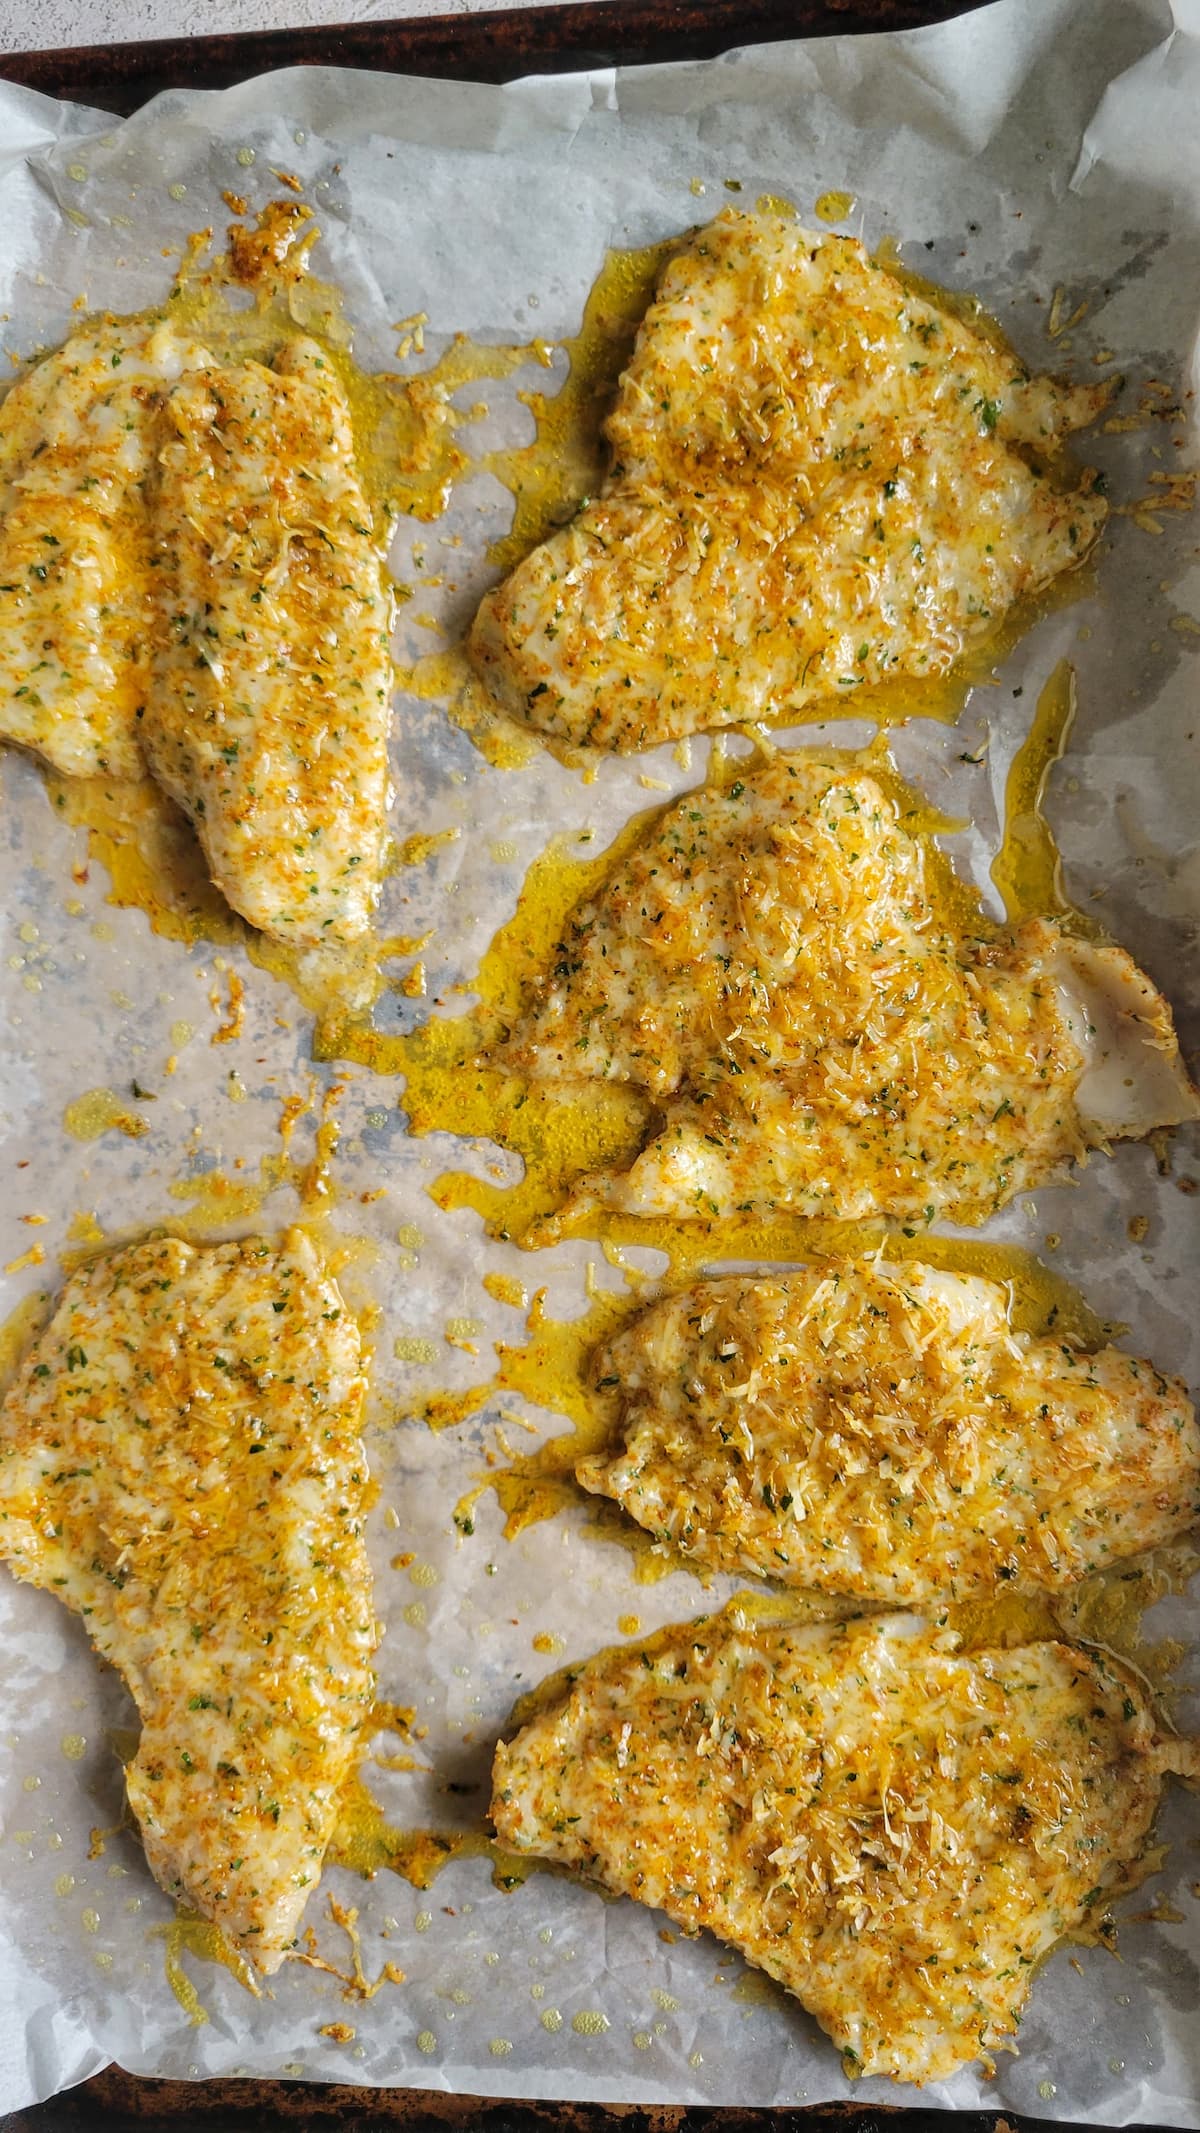 6 cooked parmesan crusted fish fillets on a parchment lined baking sheet